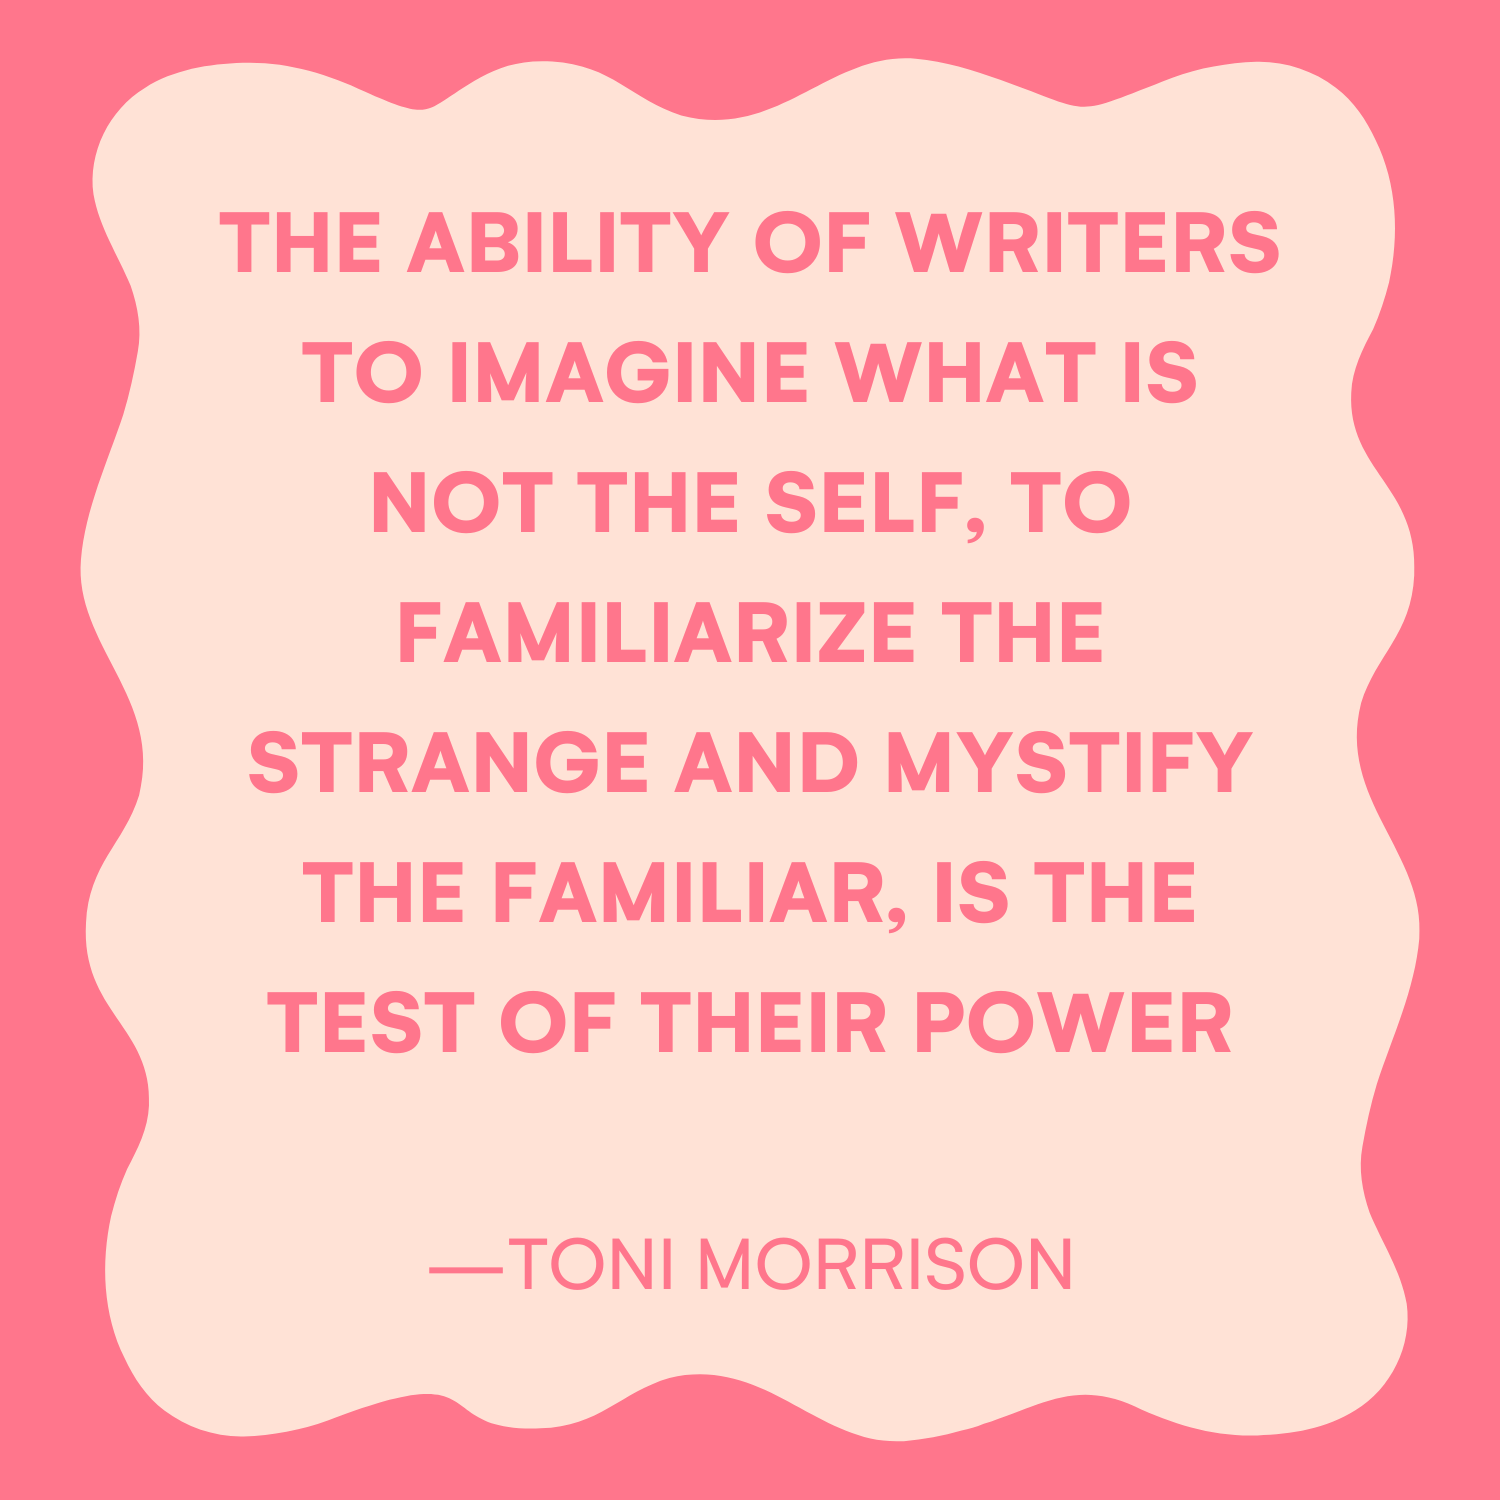 <p>"The ability of writers to imagine what is not the self, to familiarize the strange and mystify the familiar, is the test of their power." — Toni Morrison</p>